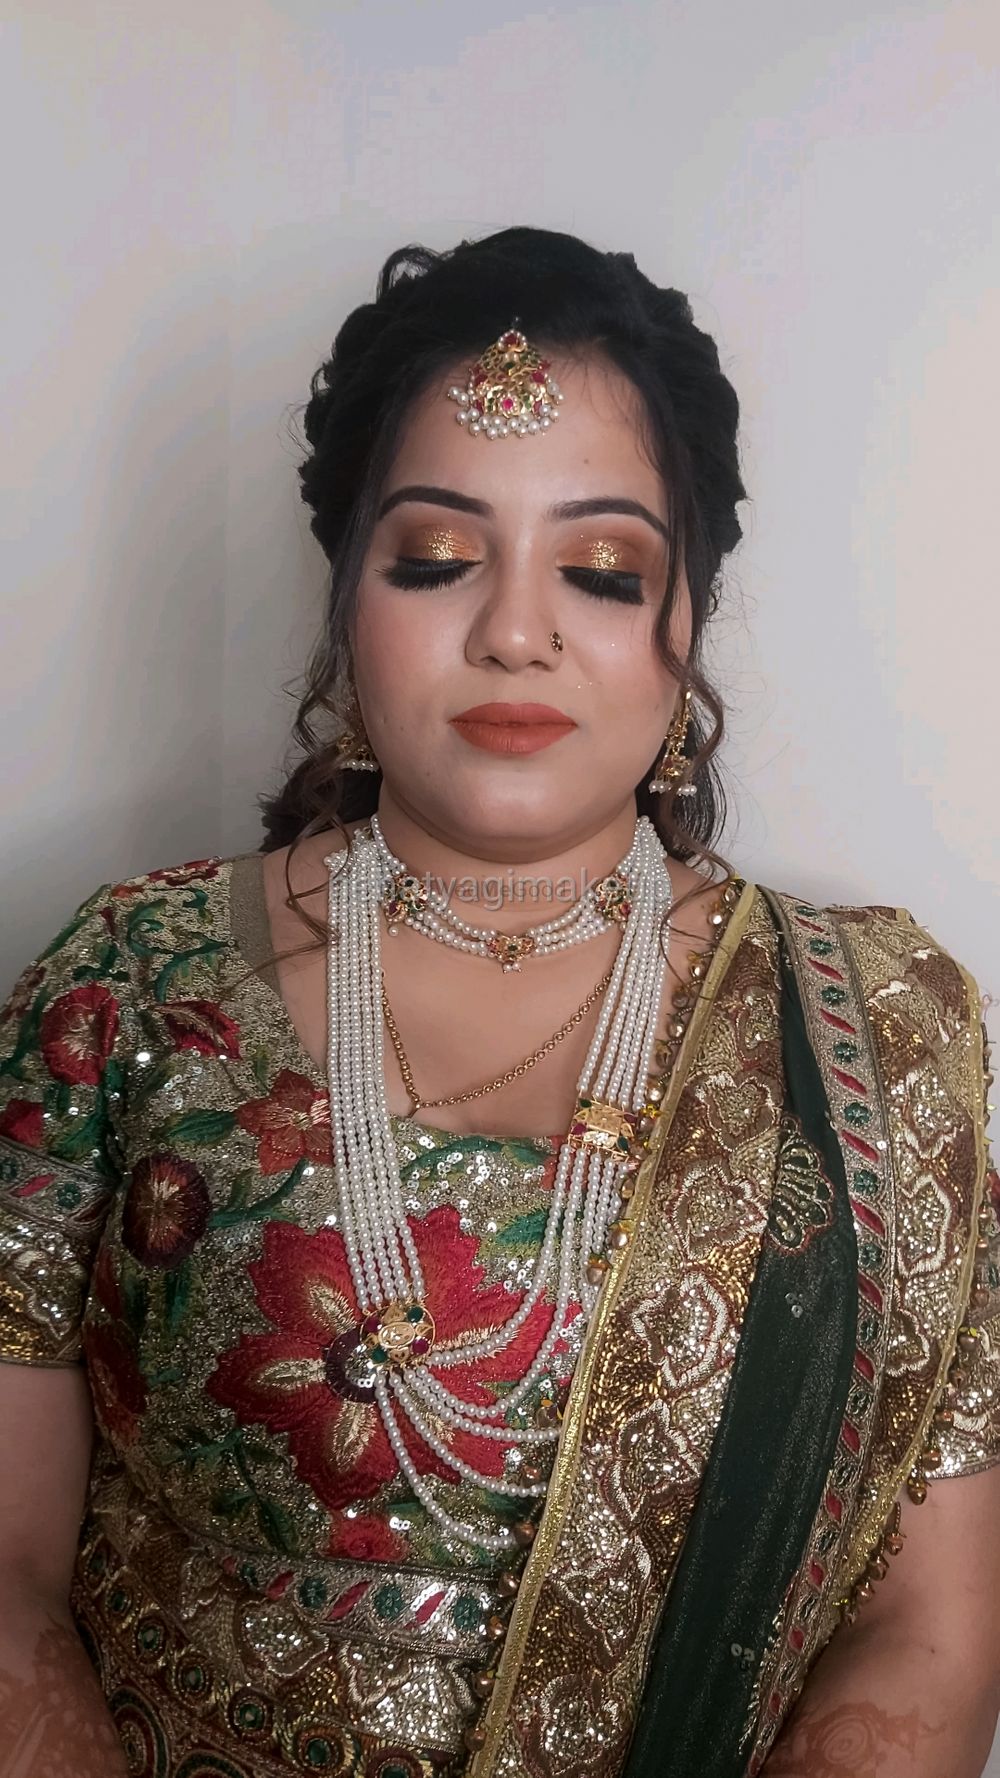 Photo From Party Makeup - By Neha Tyagi Makeup Studio